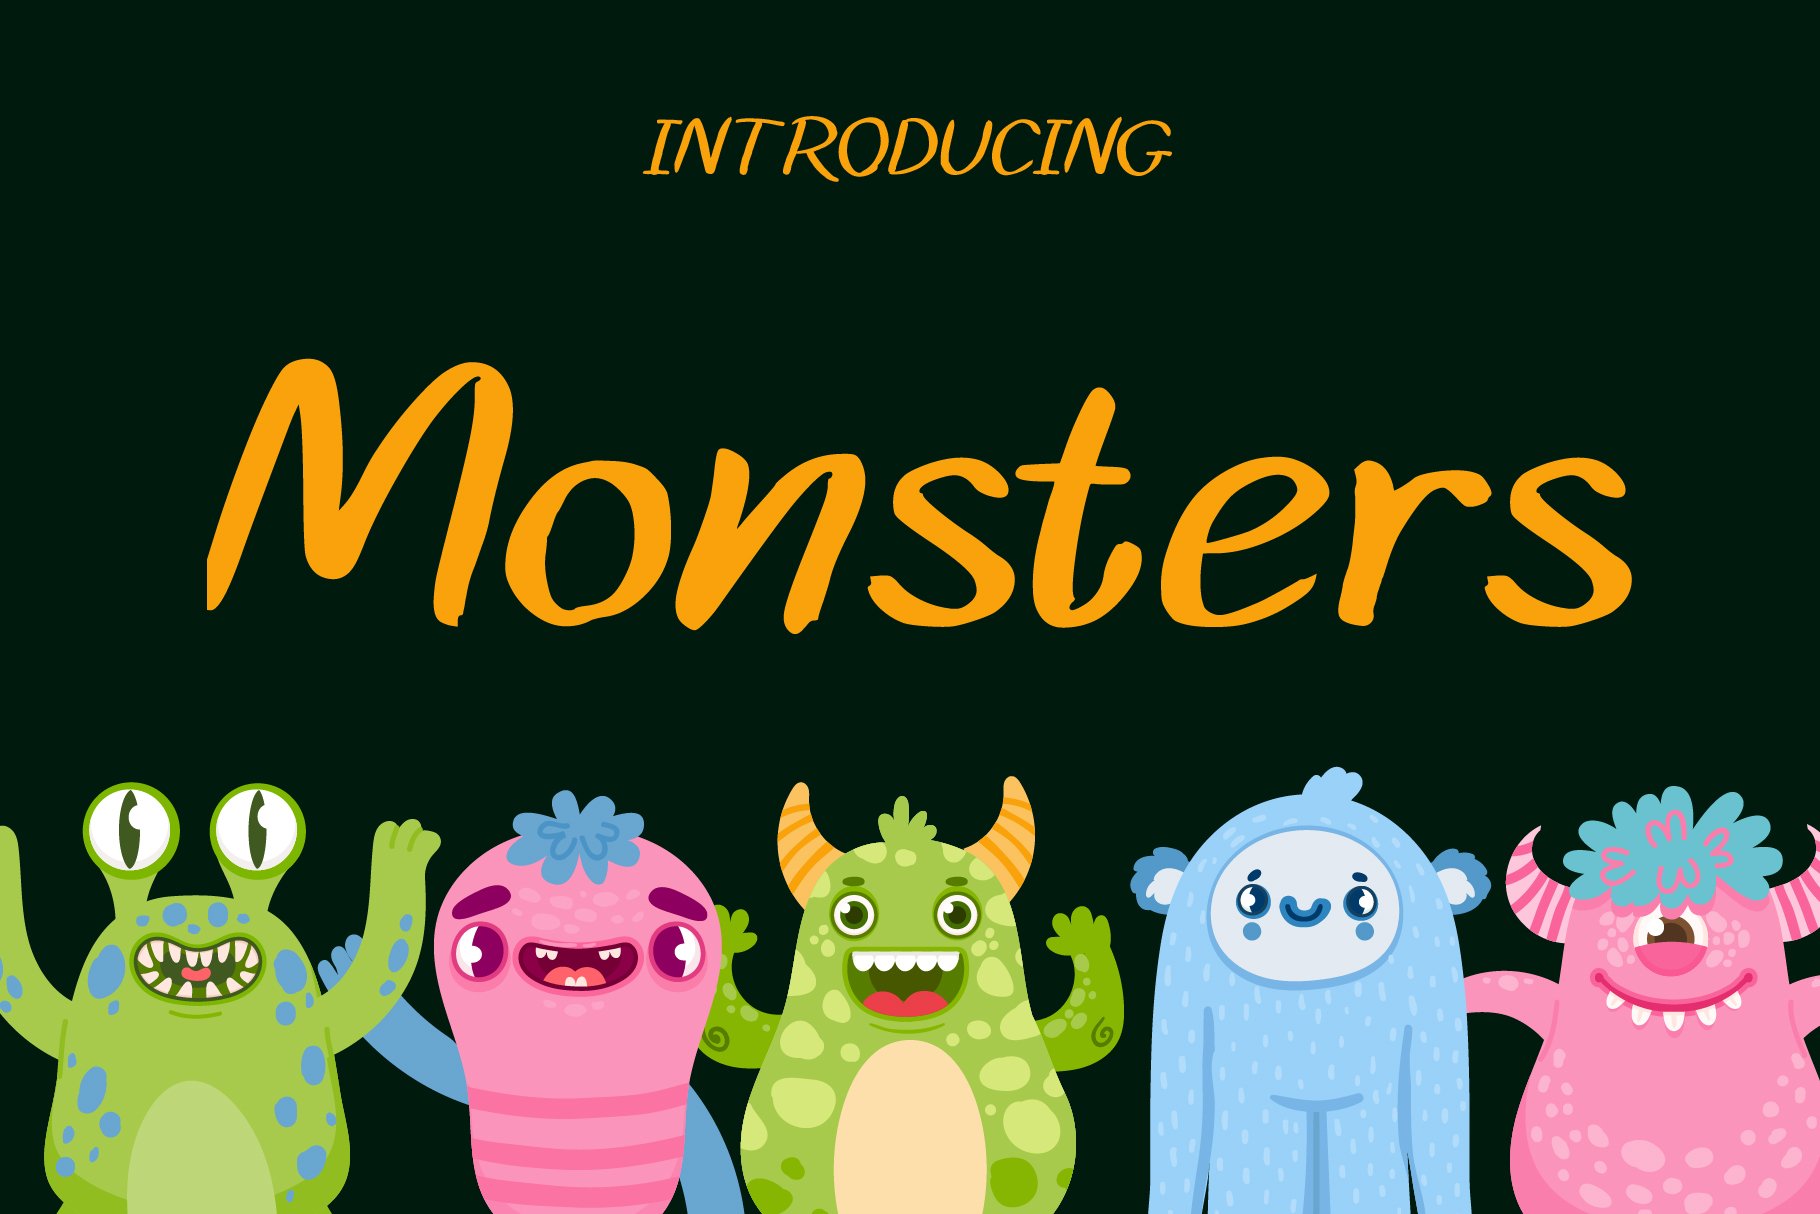 Monsters Font cover image.